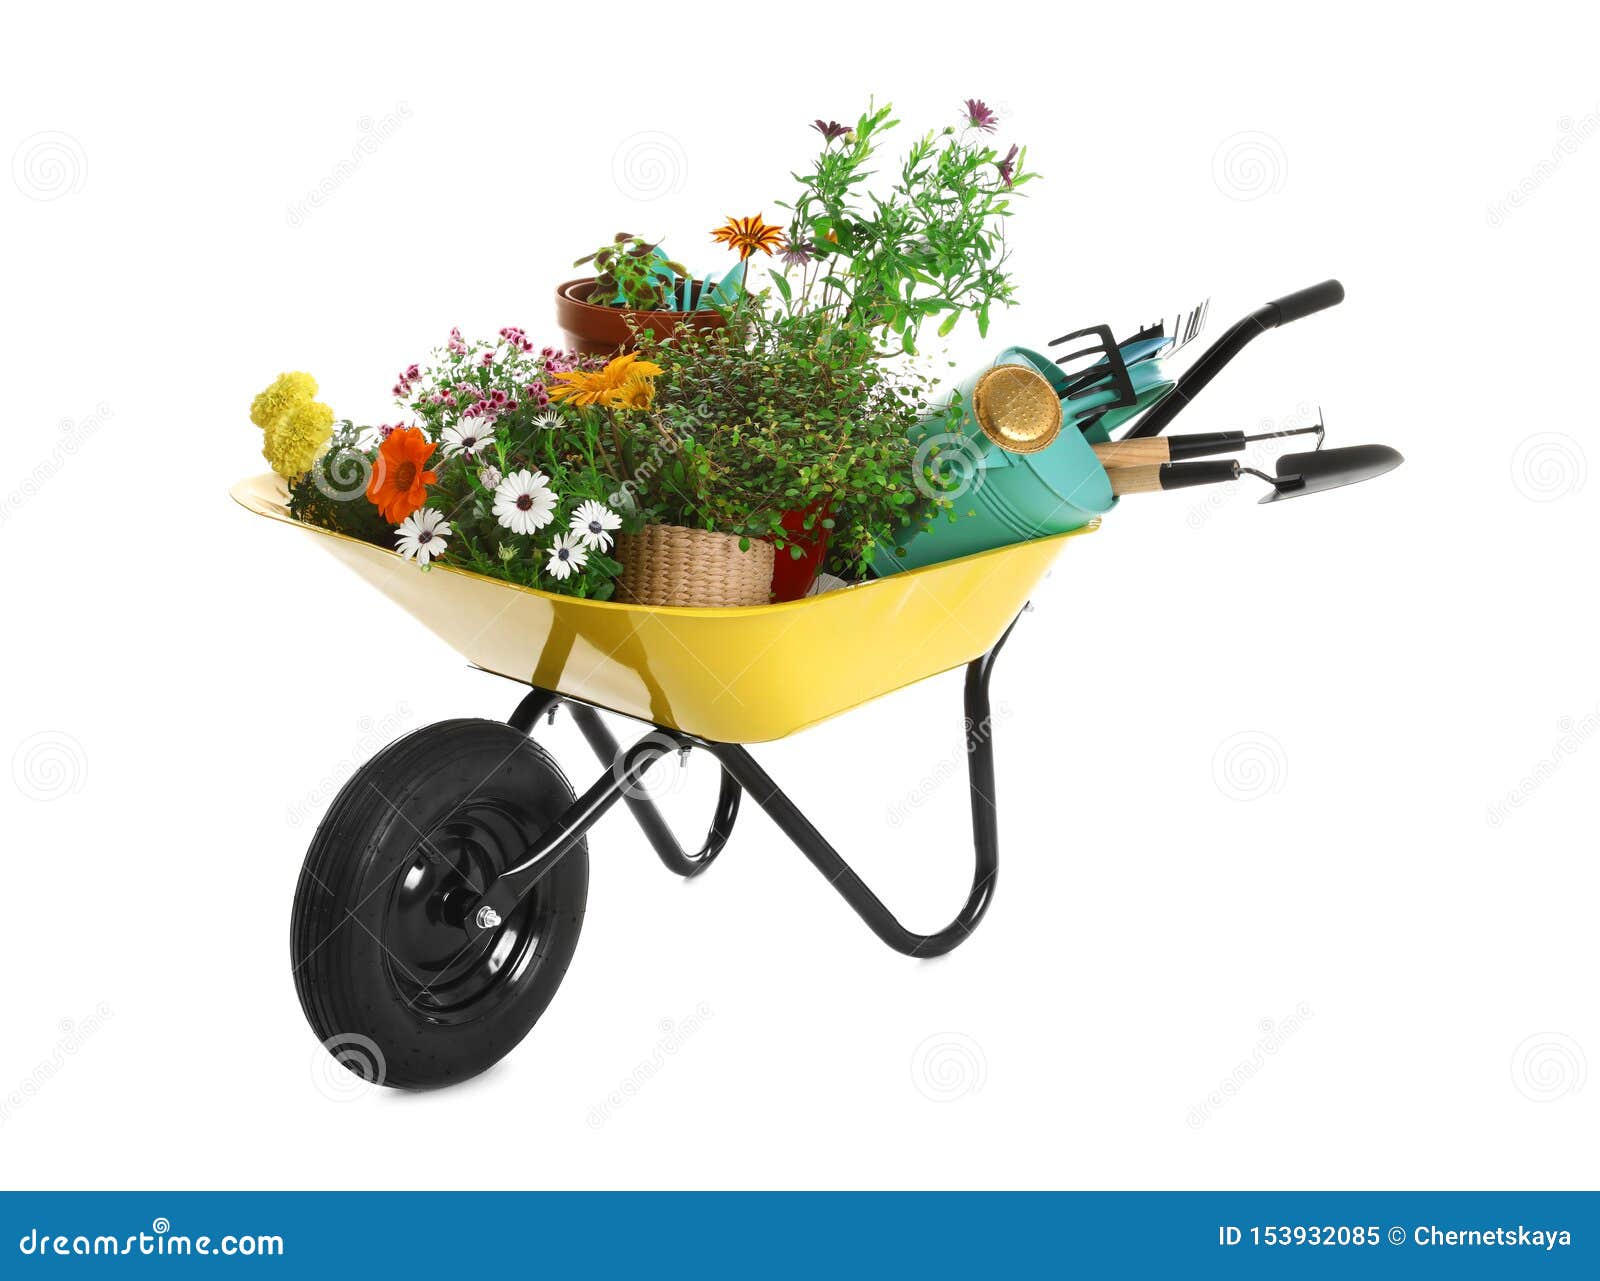 wheelbarrow with flowers and gardening tools on white